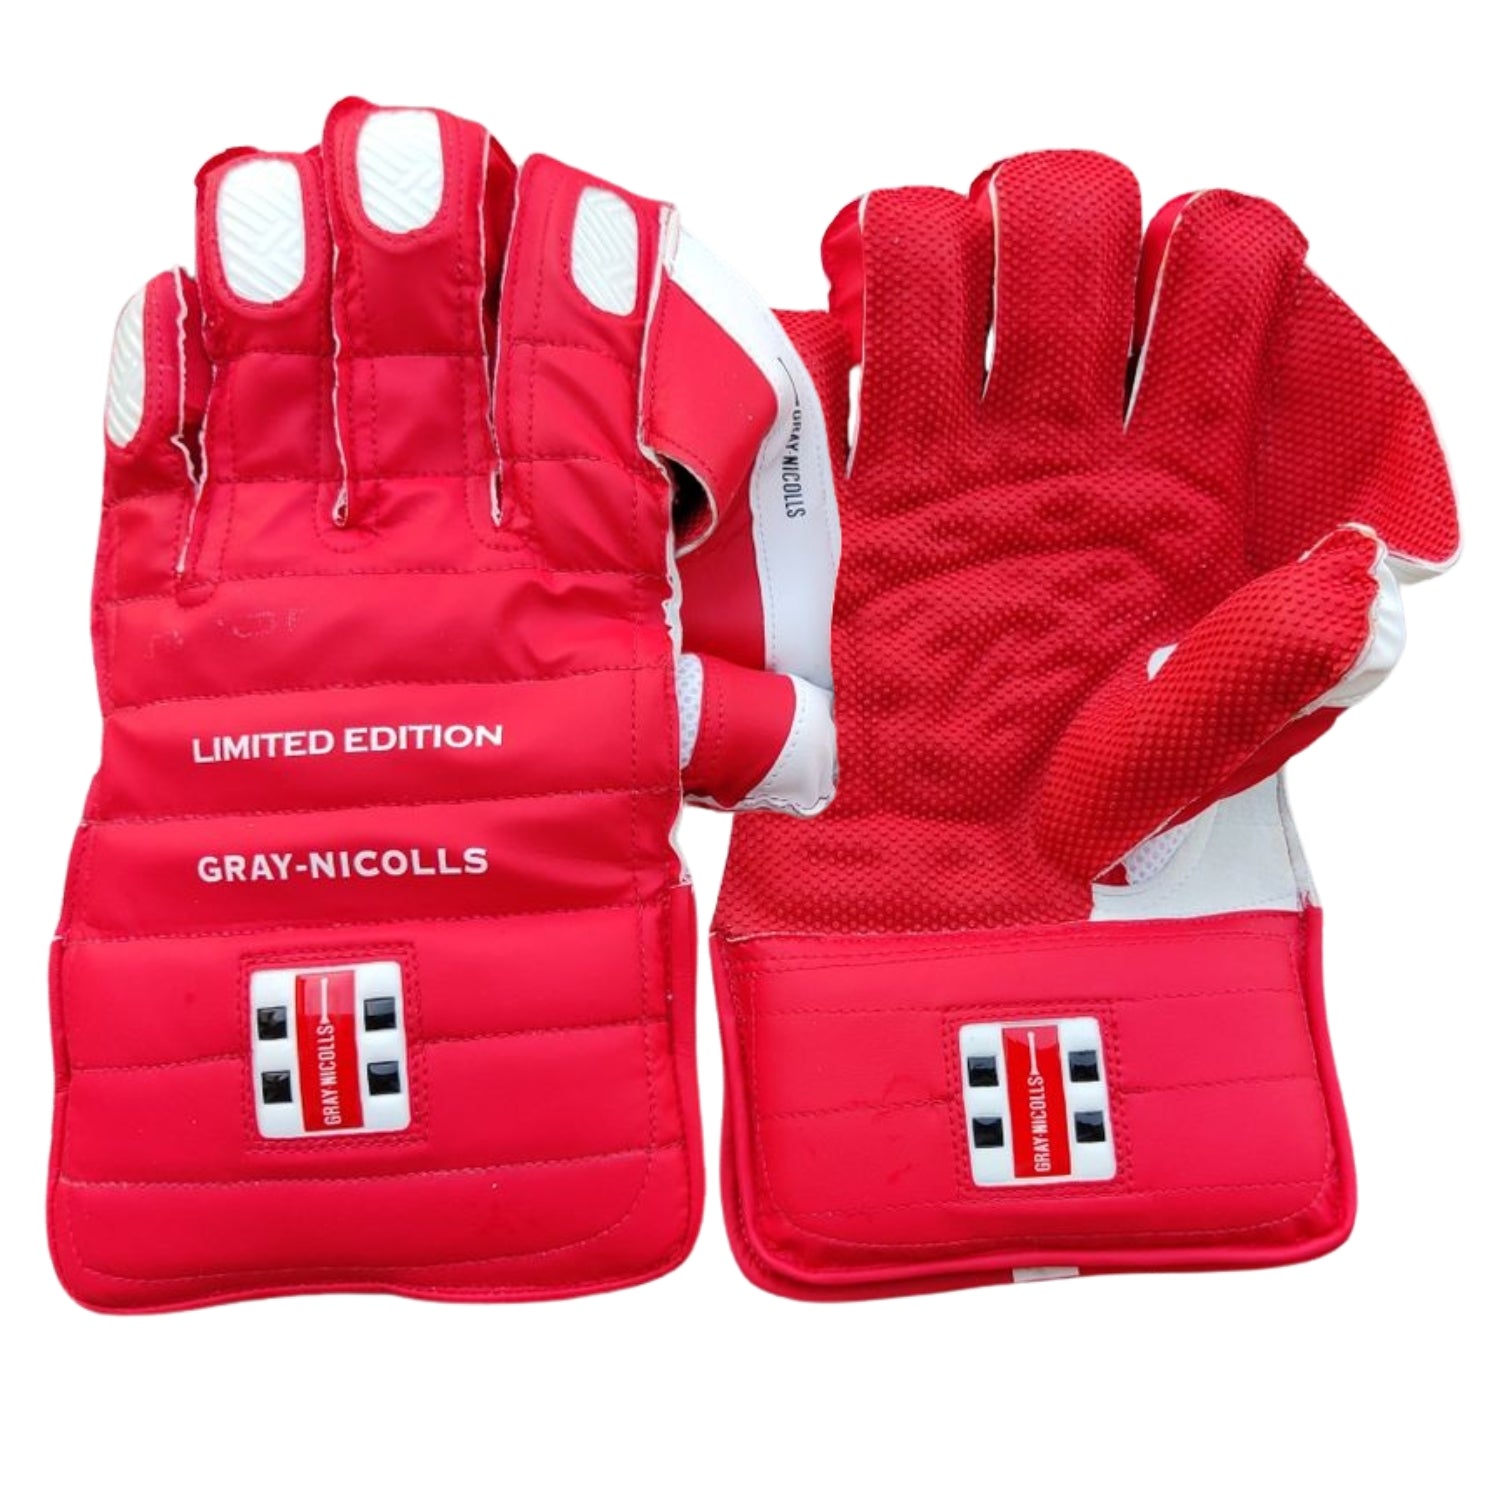 Gray Nicolls Wicket Keeper Gloves, Model Limited Edition, Adult